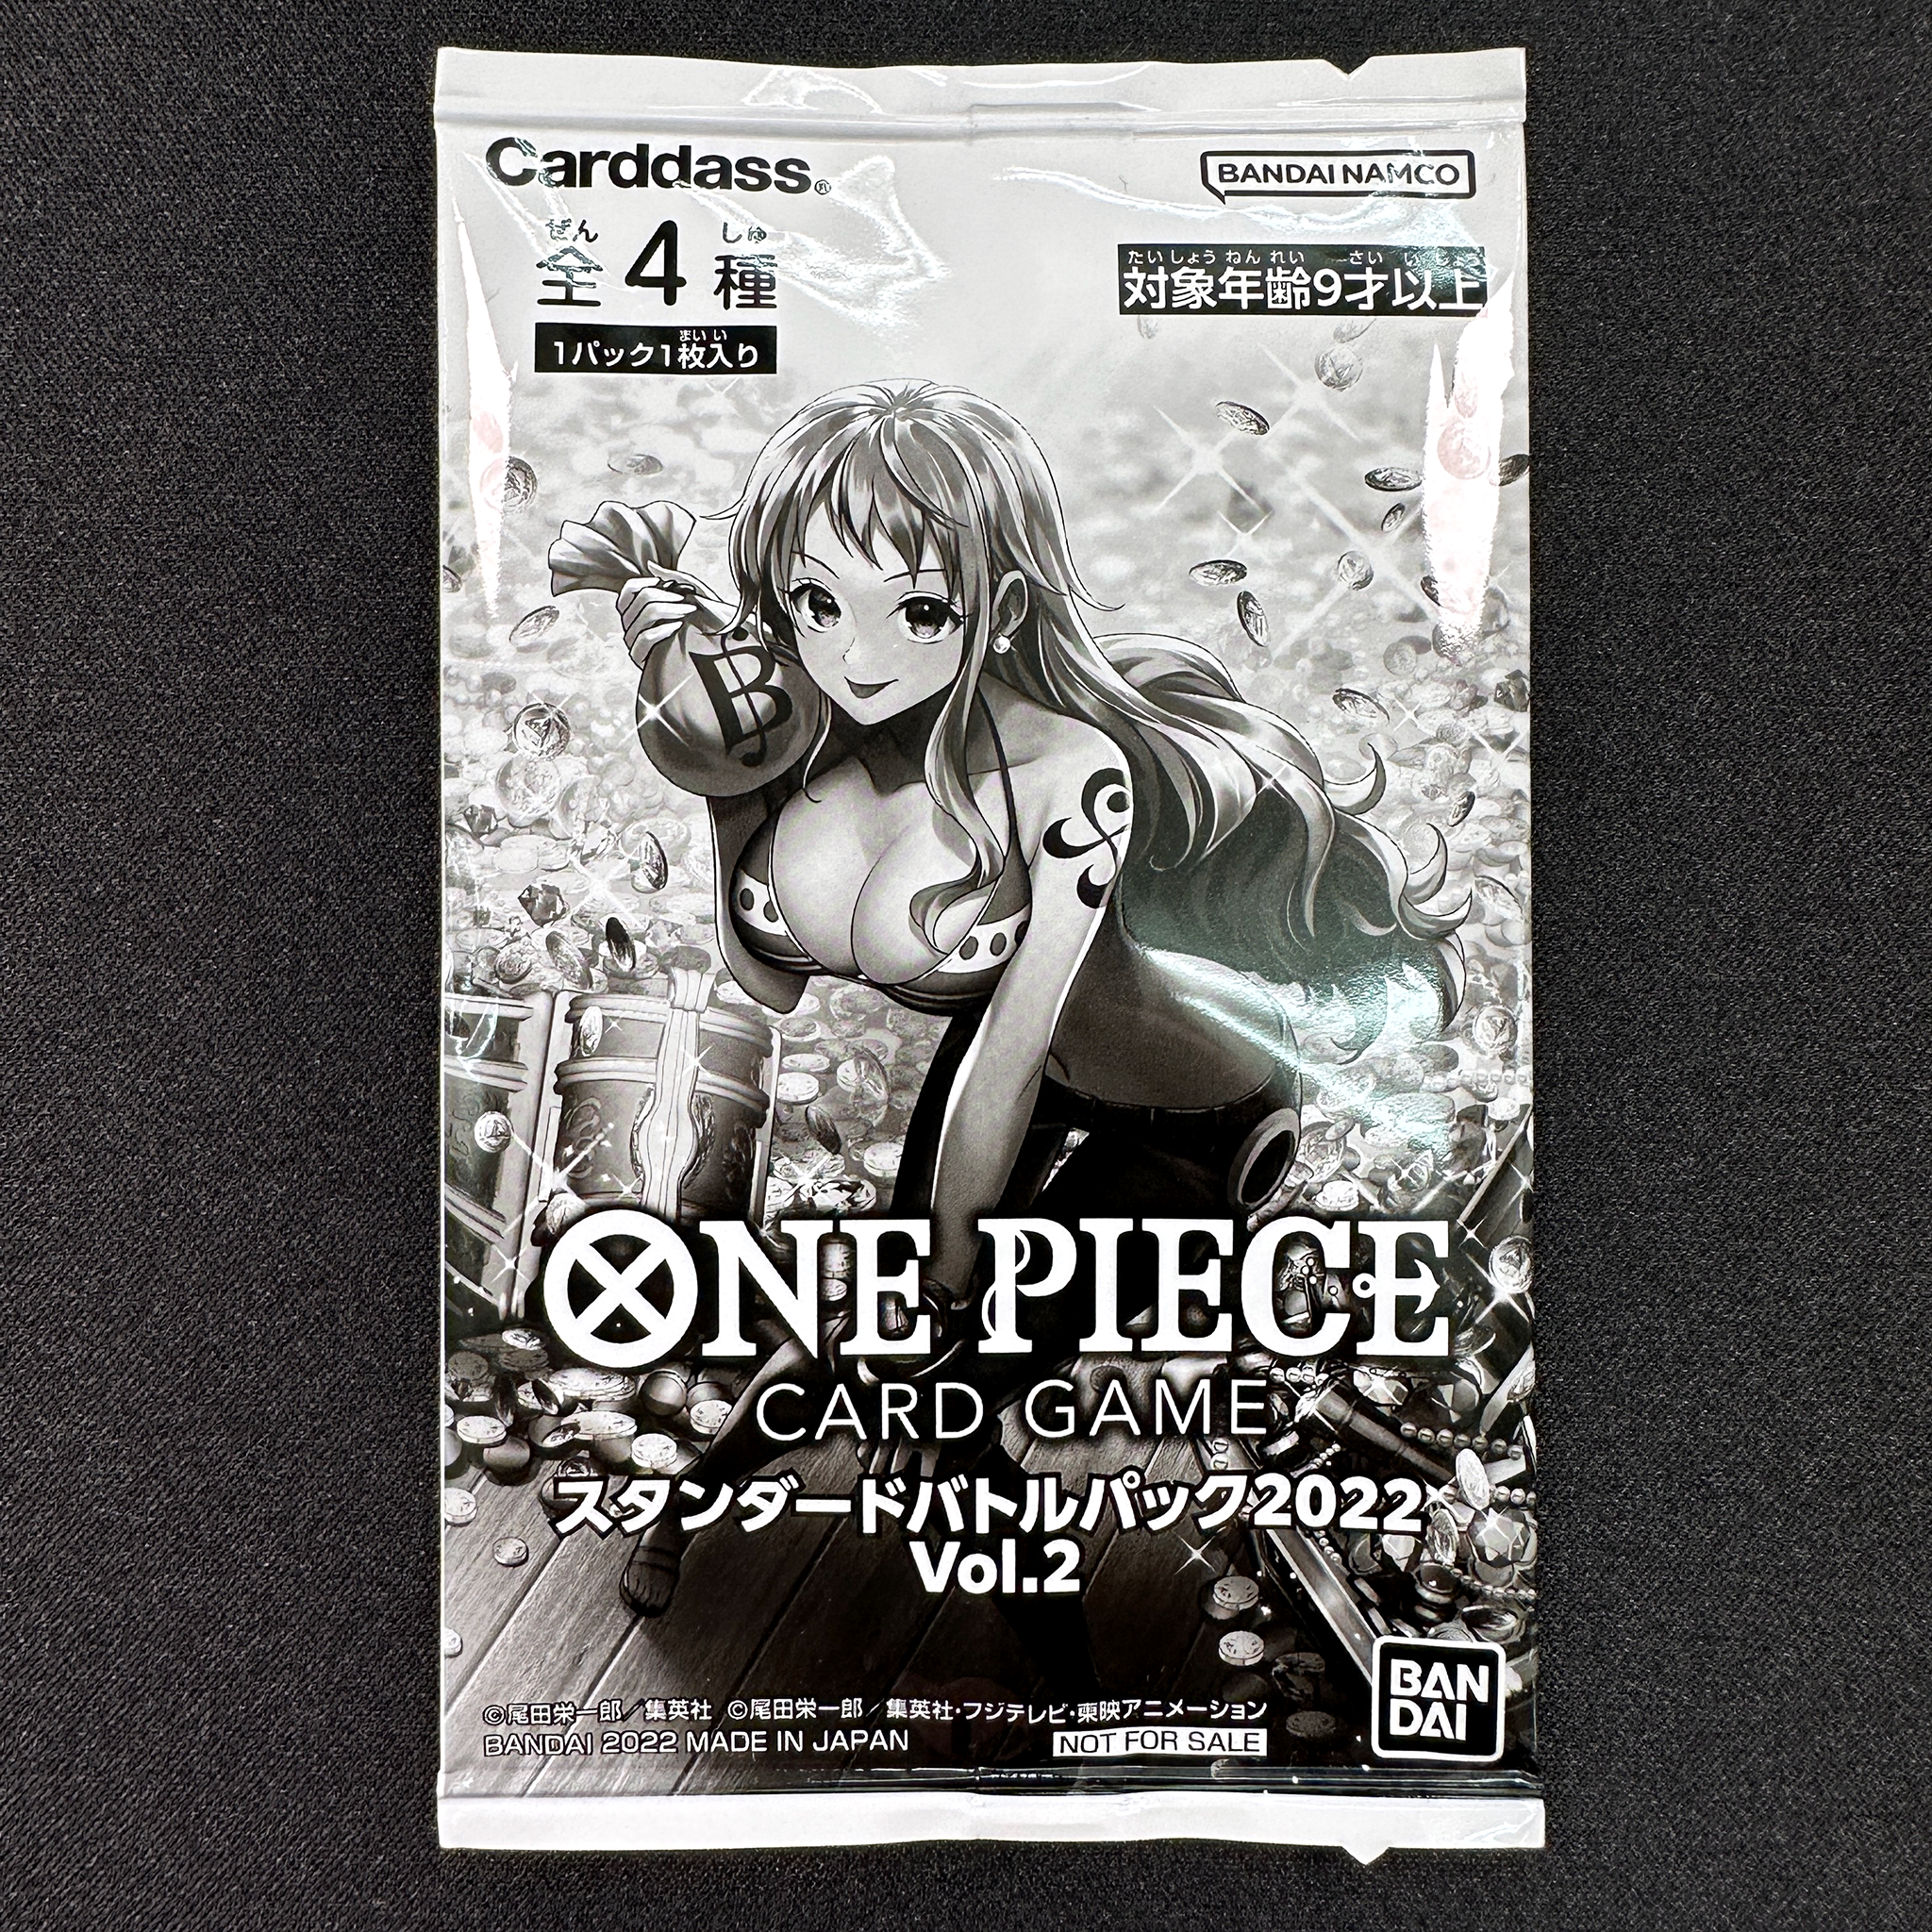 ONE PIECE CARD GAME Standard Battle Pack 2022 Vol.2  Release date: December 2022  Very limited item from IRL Standard Battle event.  Booster containing a random card among 4 different ones.